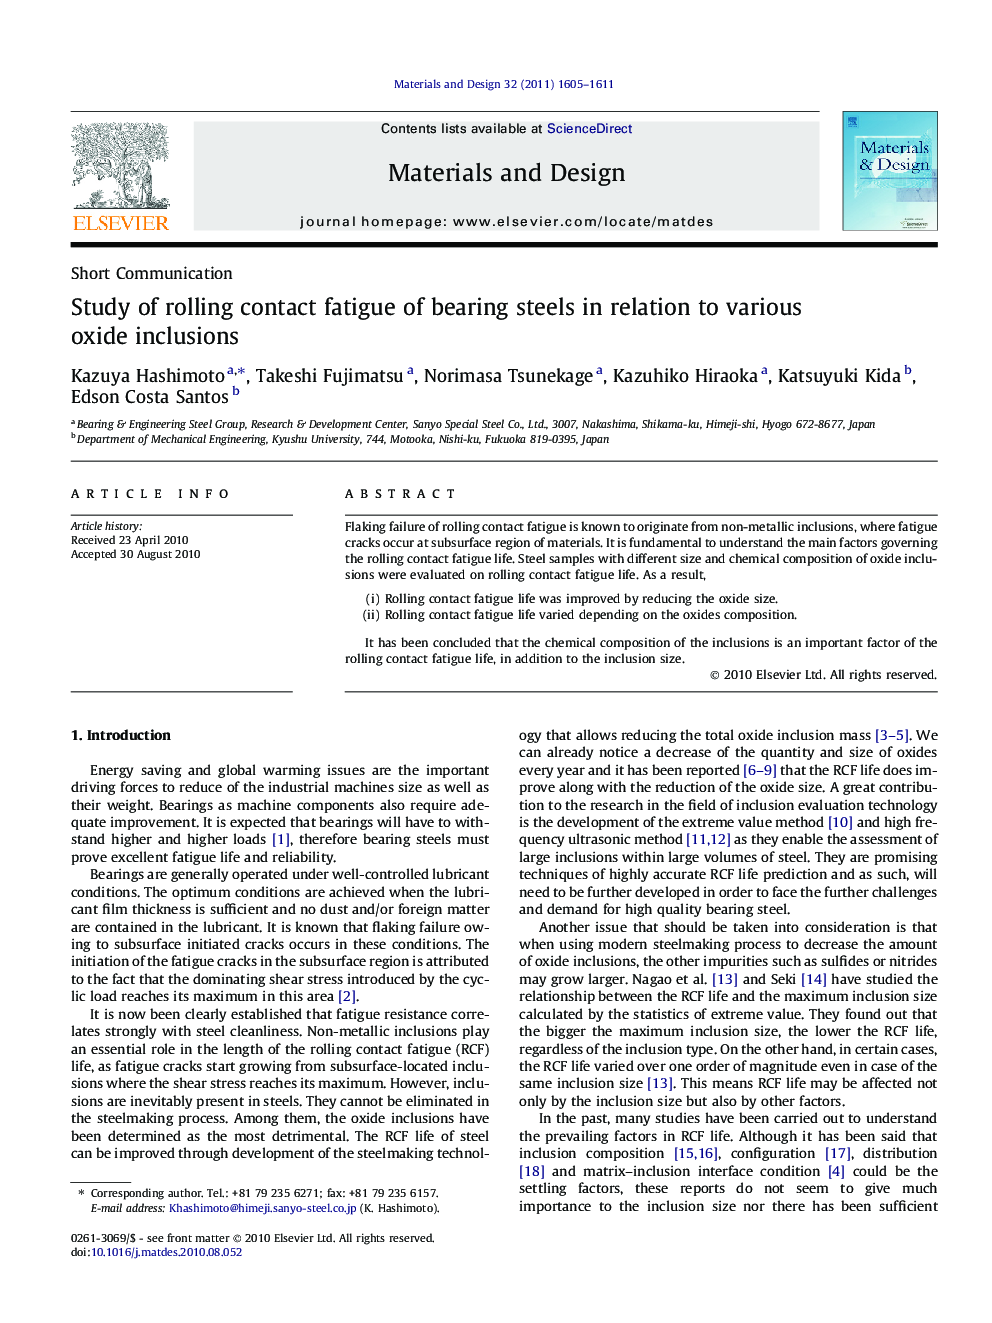 Study of rolling contact fatigue of bearing steels in relation to various oxide inclusions